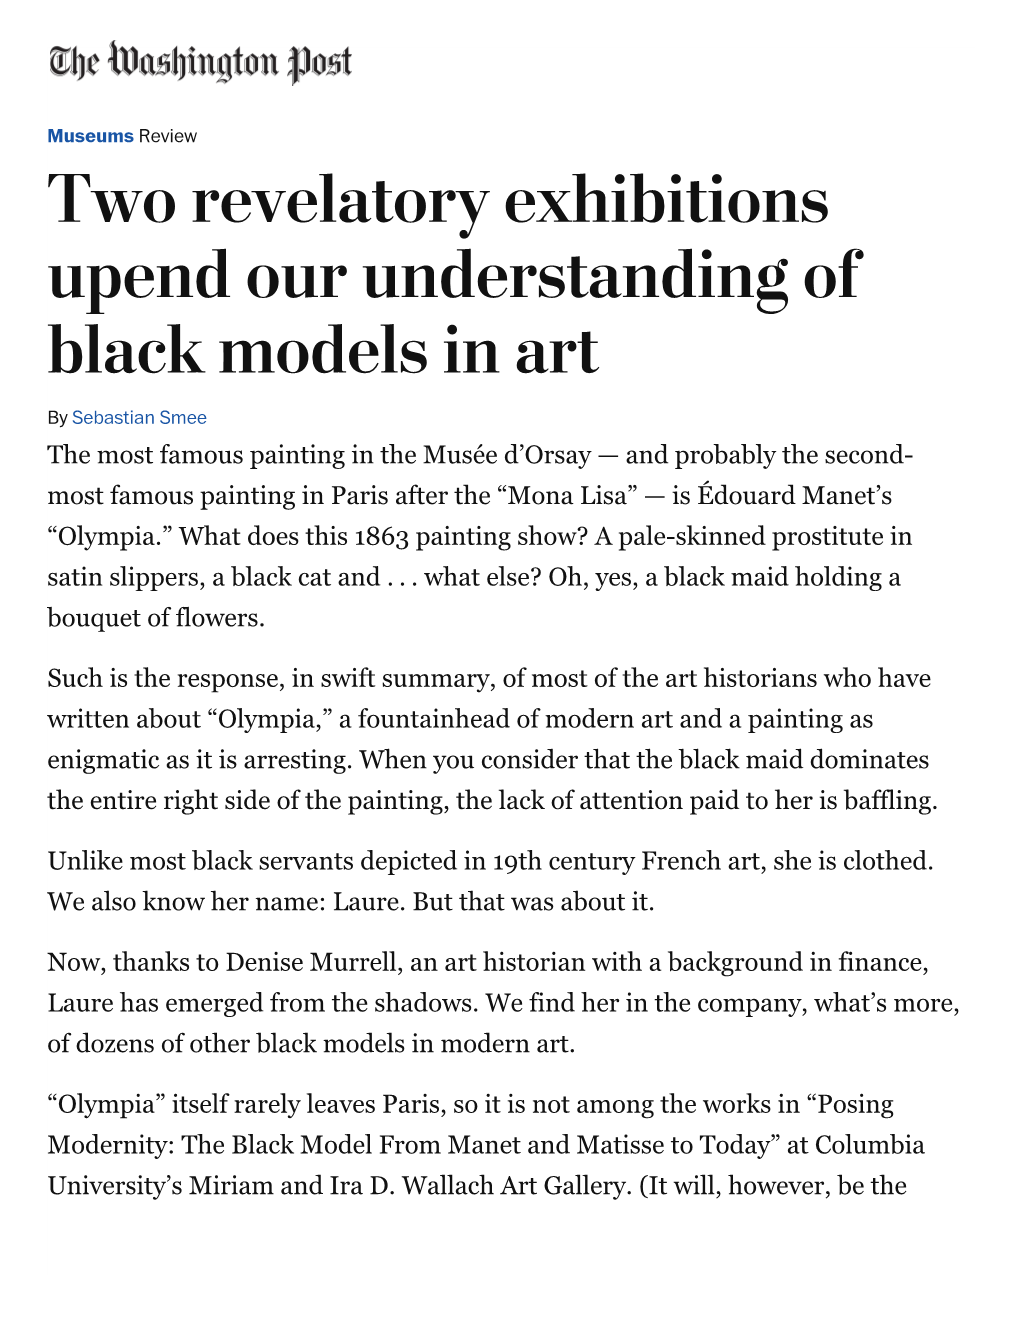 Two Revelatory Exhibitions Upend Our Understanding of Black Models In